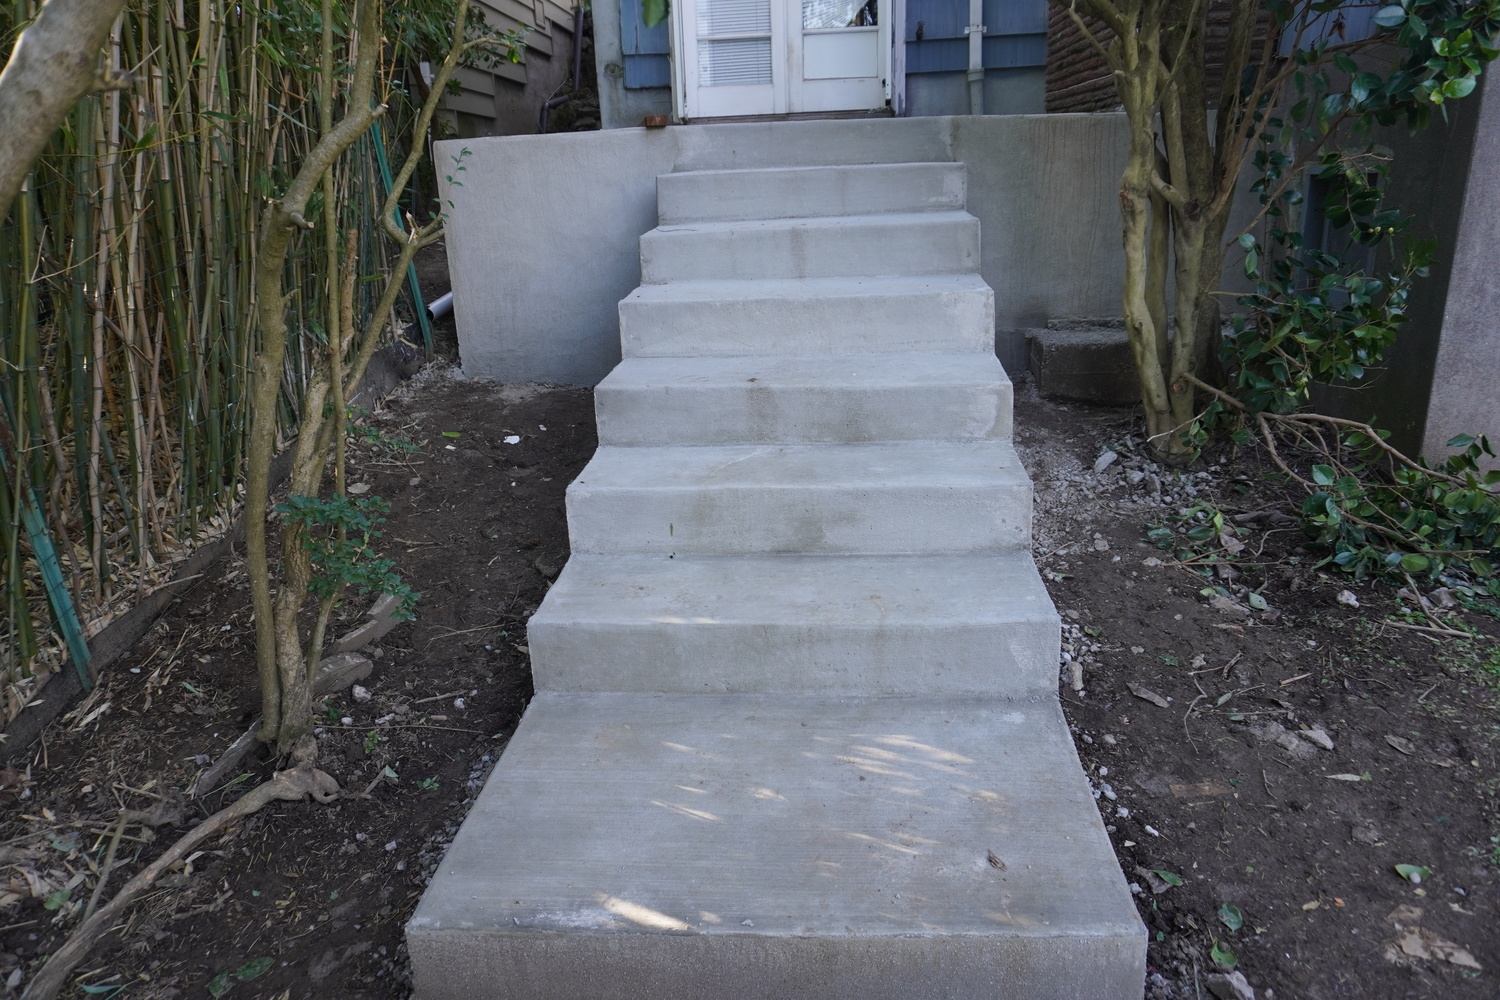 How to Repair Broken Concrete Stairs – Quick and Easy